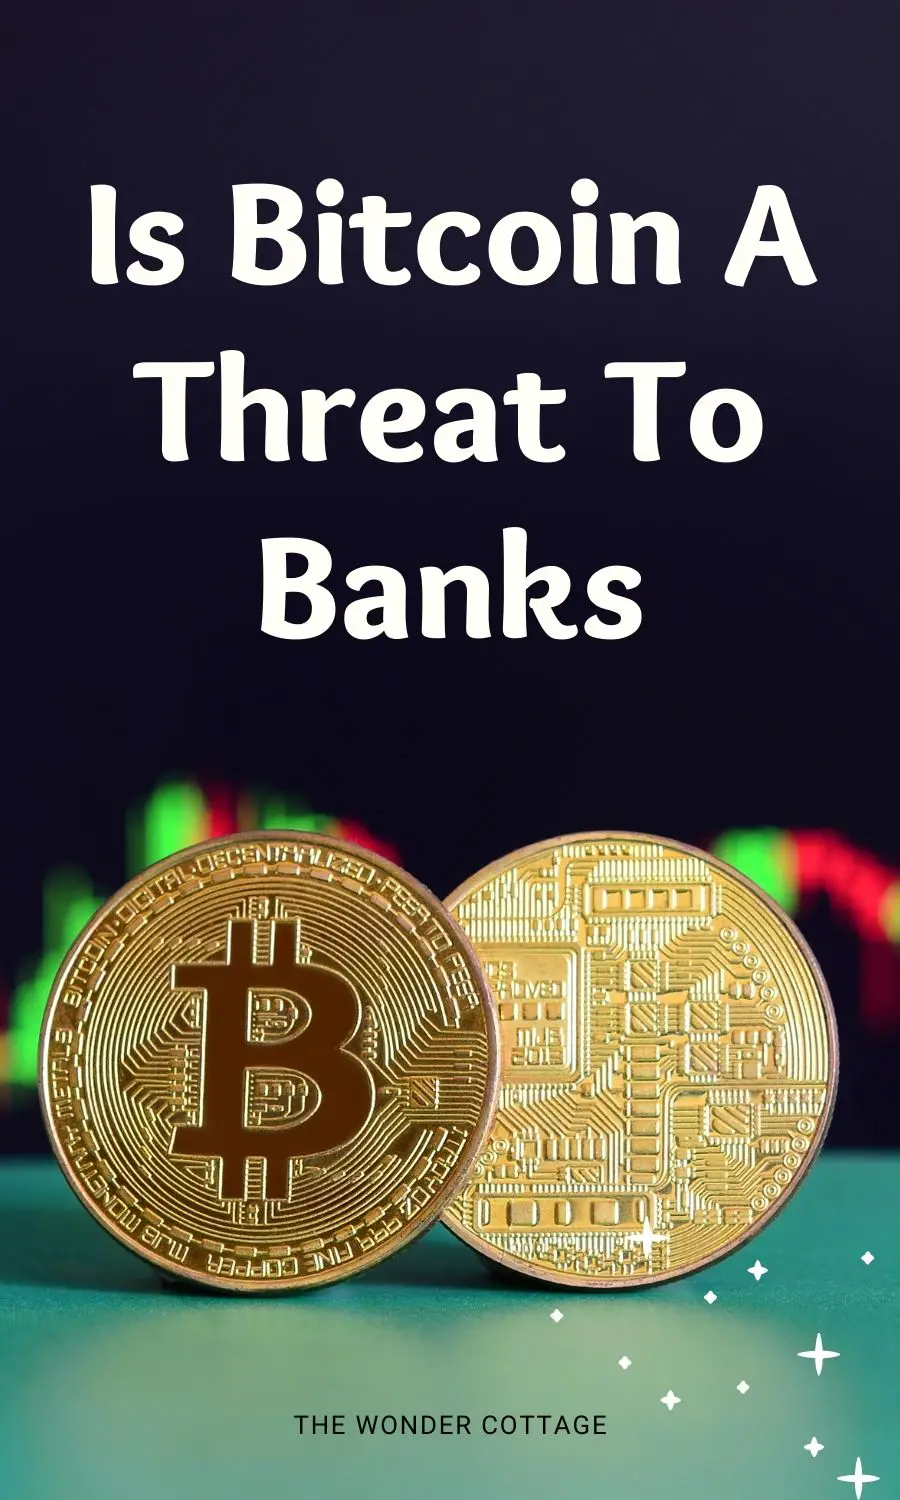 Is Bitcoin A Threat To Banks?